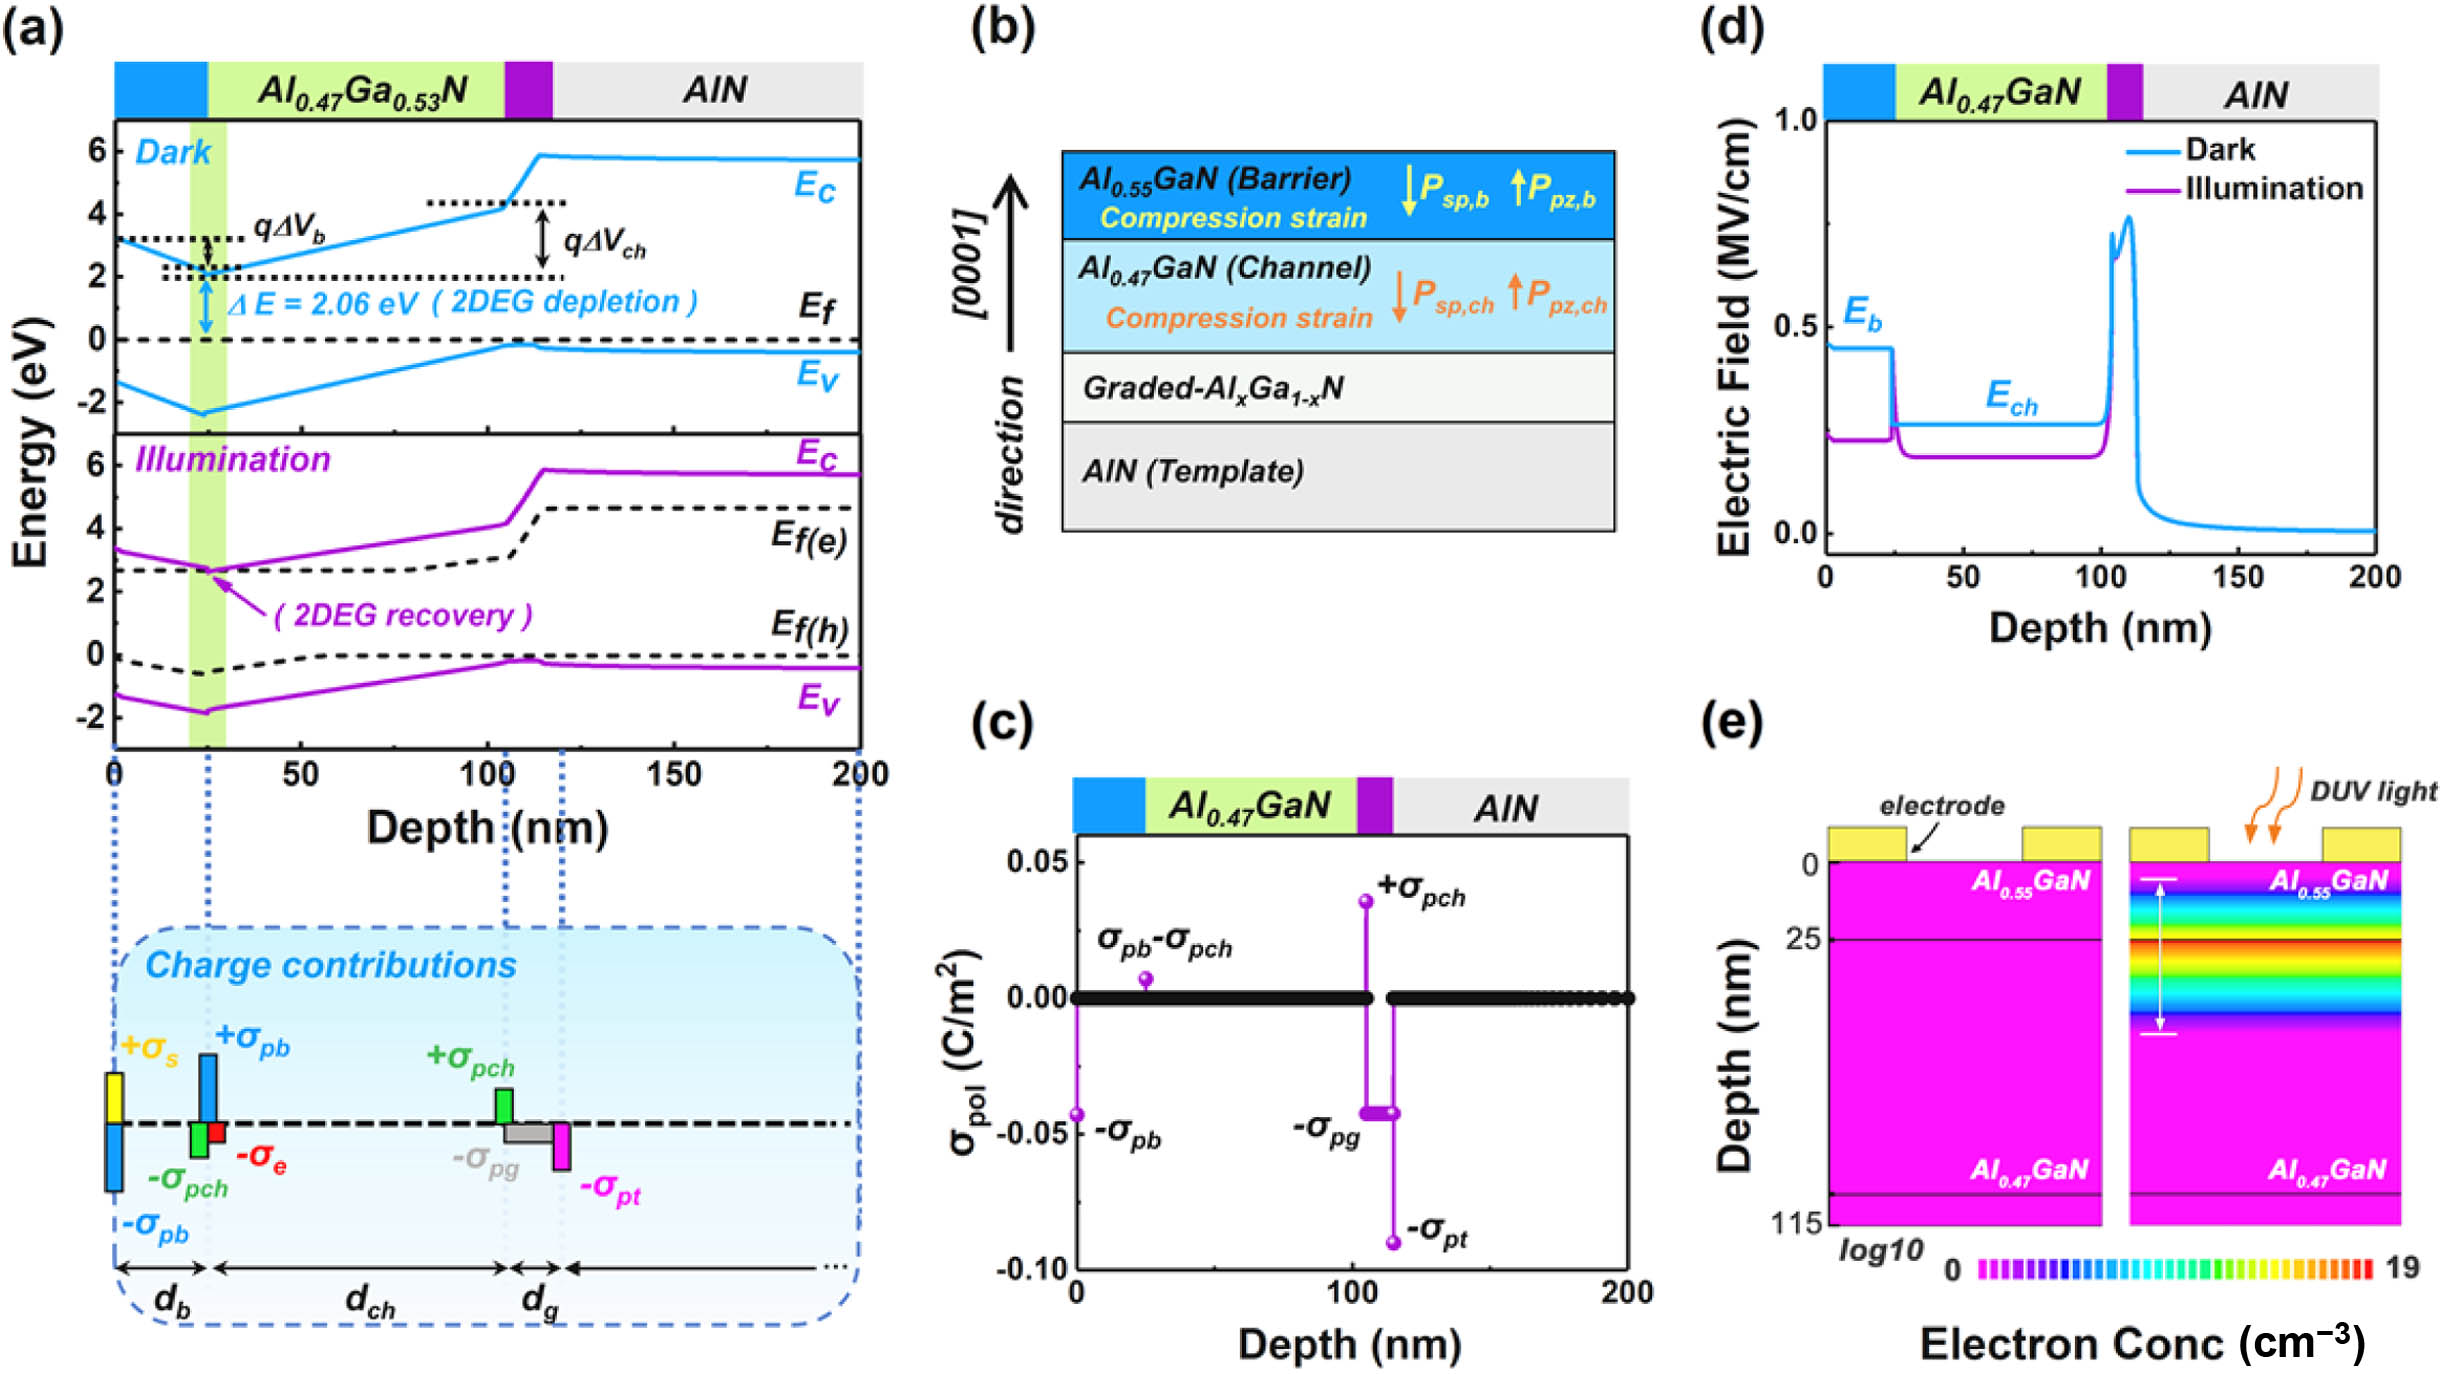 (a) Simulated energy band diagram of the phototransistor under zero bias voltage in the dark and 240 nm illumination of 0.1 μW/cm2 (upper panel) and the corresponding charge contributions (lower panel). (b) Directions of the spontaneous and piezoelectric polarization in our compressively strained Al0.55Ga0.45N/Al0.47Ga0.53N/AlN heterostructure. (c) Polarization charge distribution in the epitaxial structure under dark condition. (d) Comparison of the electric field distribution before and after 240-nm DUV illumination. (e) Cross-sectional view of the electron concentration distribution in the phototransistor before (left) and after (right) 240-nm DUV illumination.